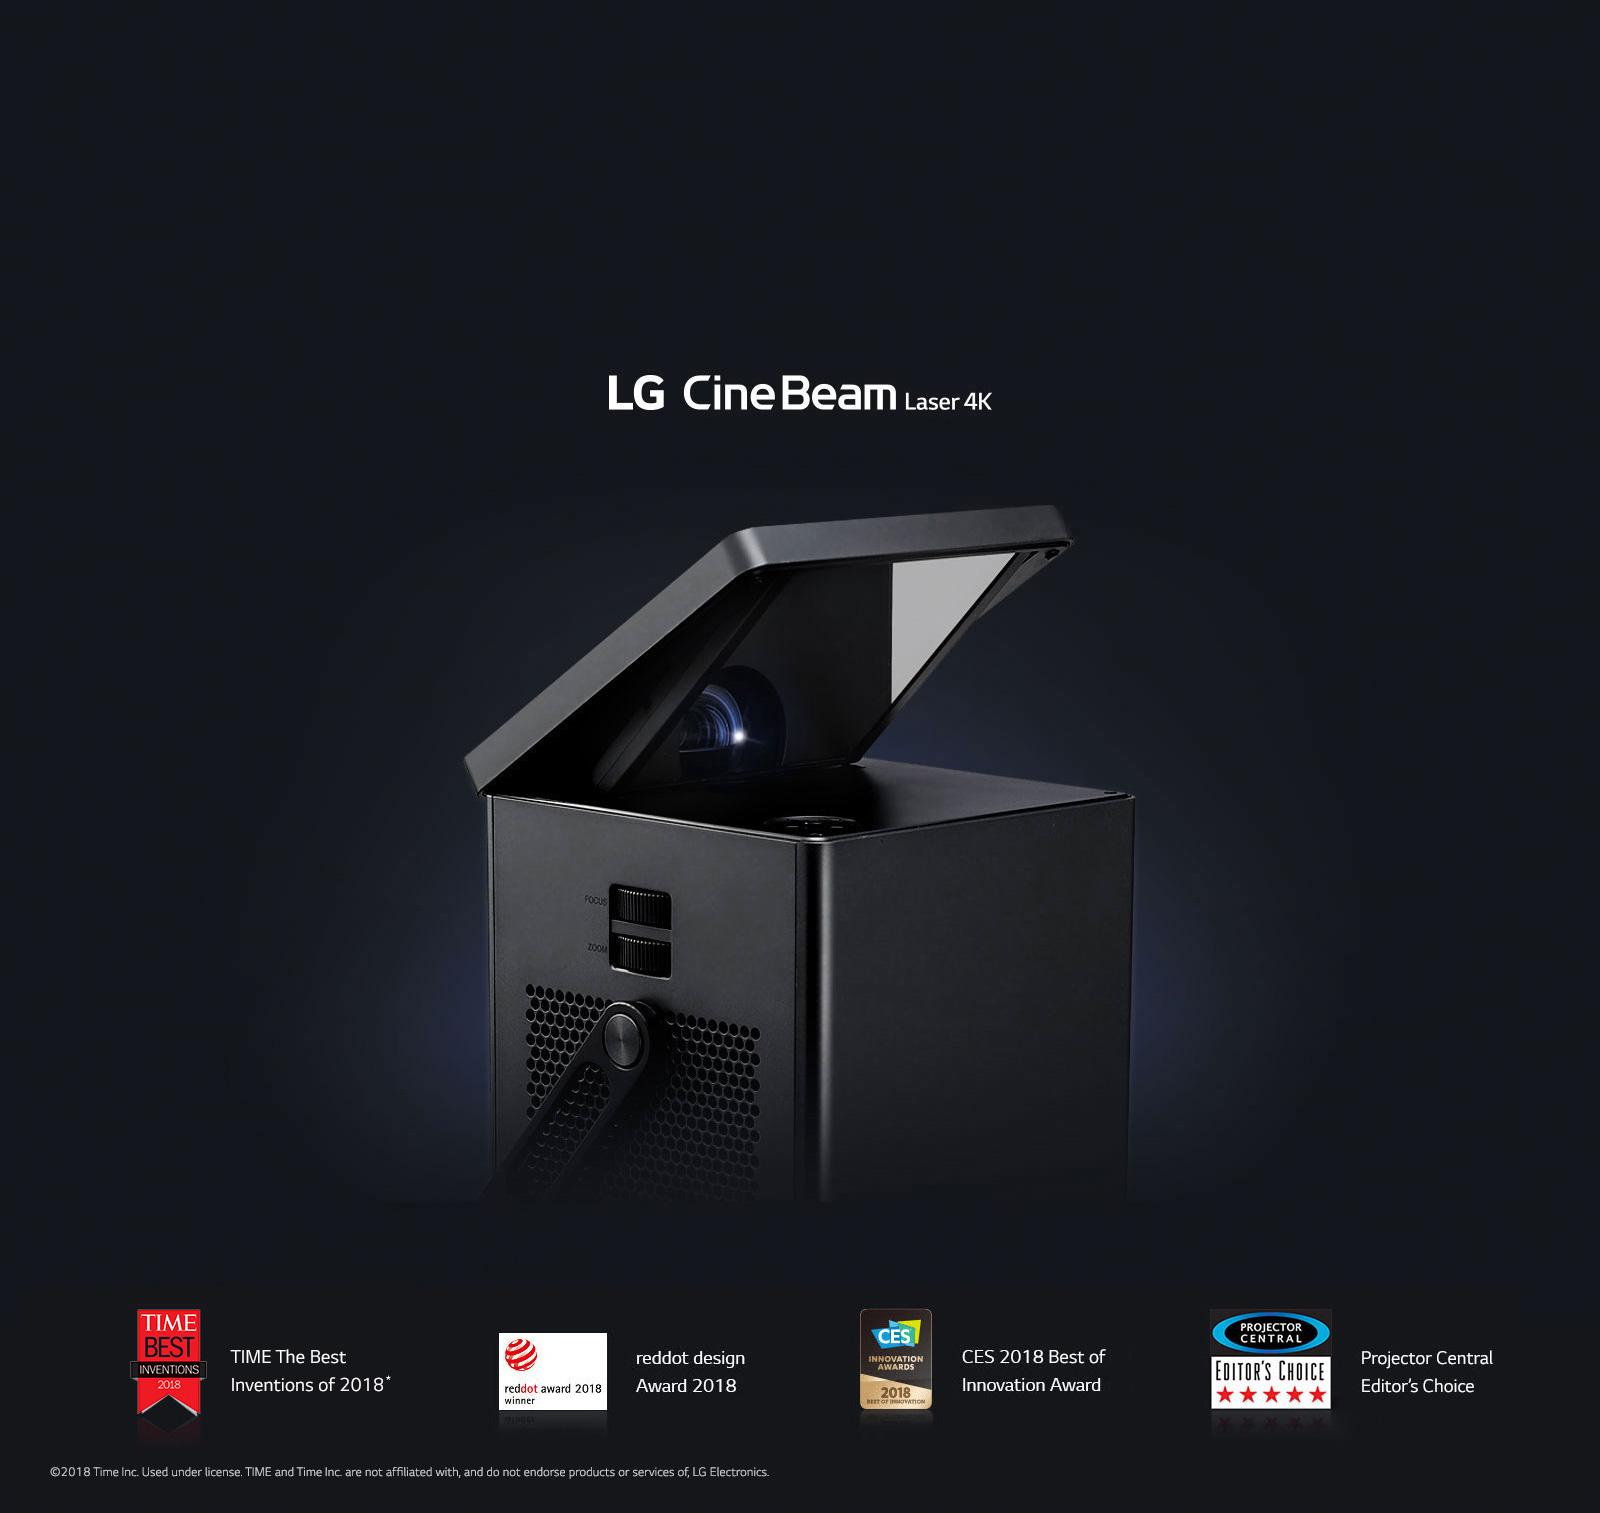 LG Cinebeam Laser 4K. Upper part of projector with black background. Time the Best Inventions of 2018 logo, reddot design award 2018 logo, CES 2018 best of innovation award logo, projector central editor's choice.